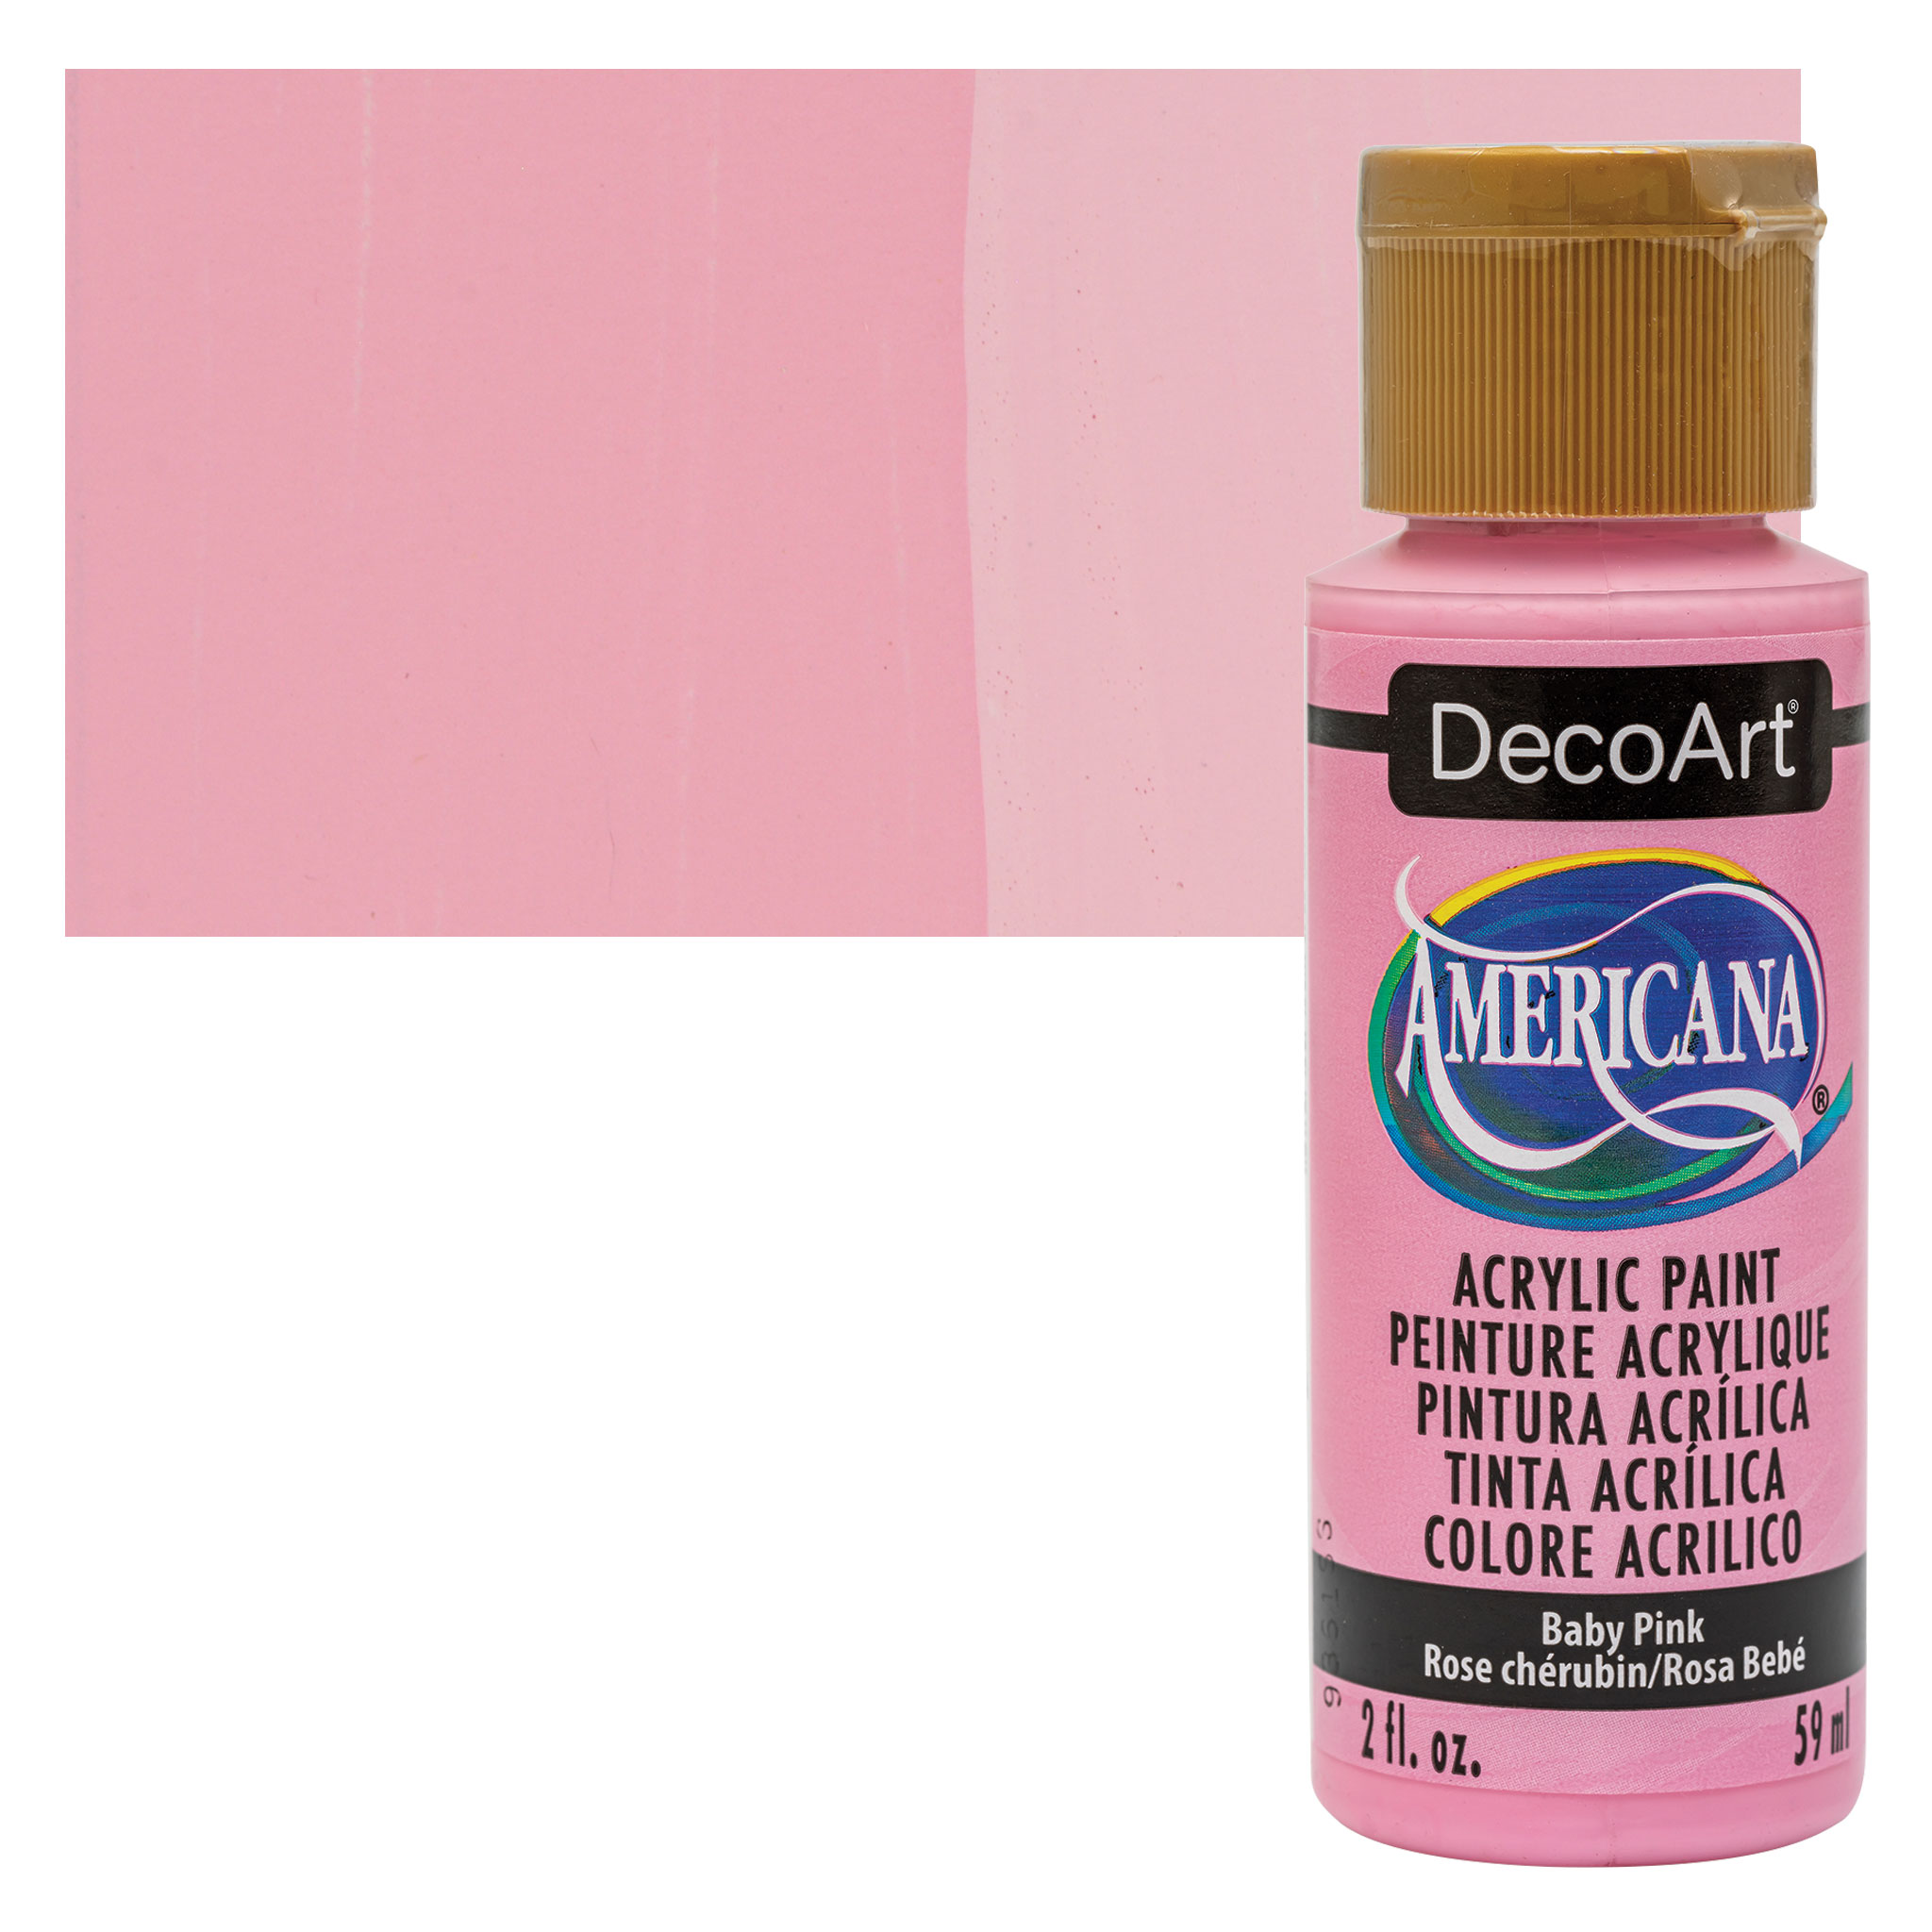 The Pink Palette - DecoArt Acrylic Paint and Art Supplies